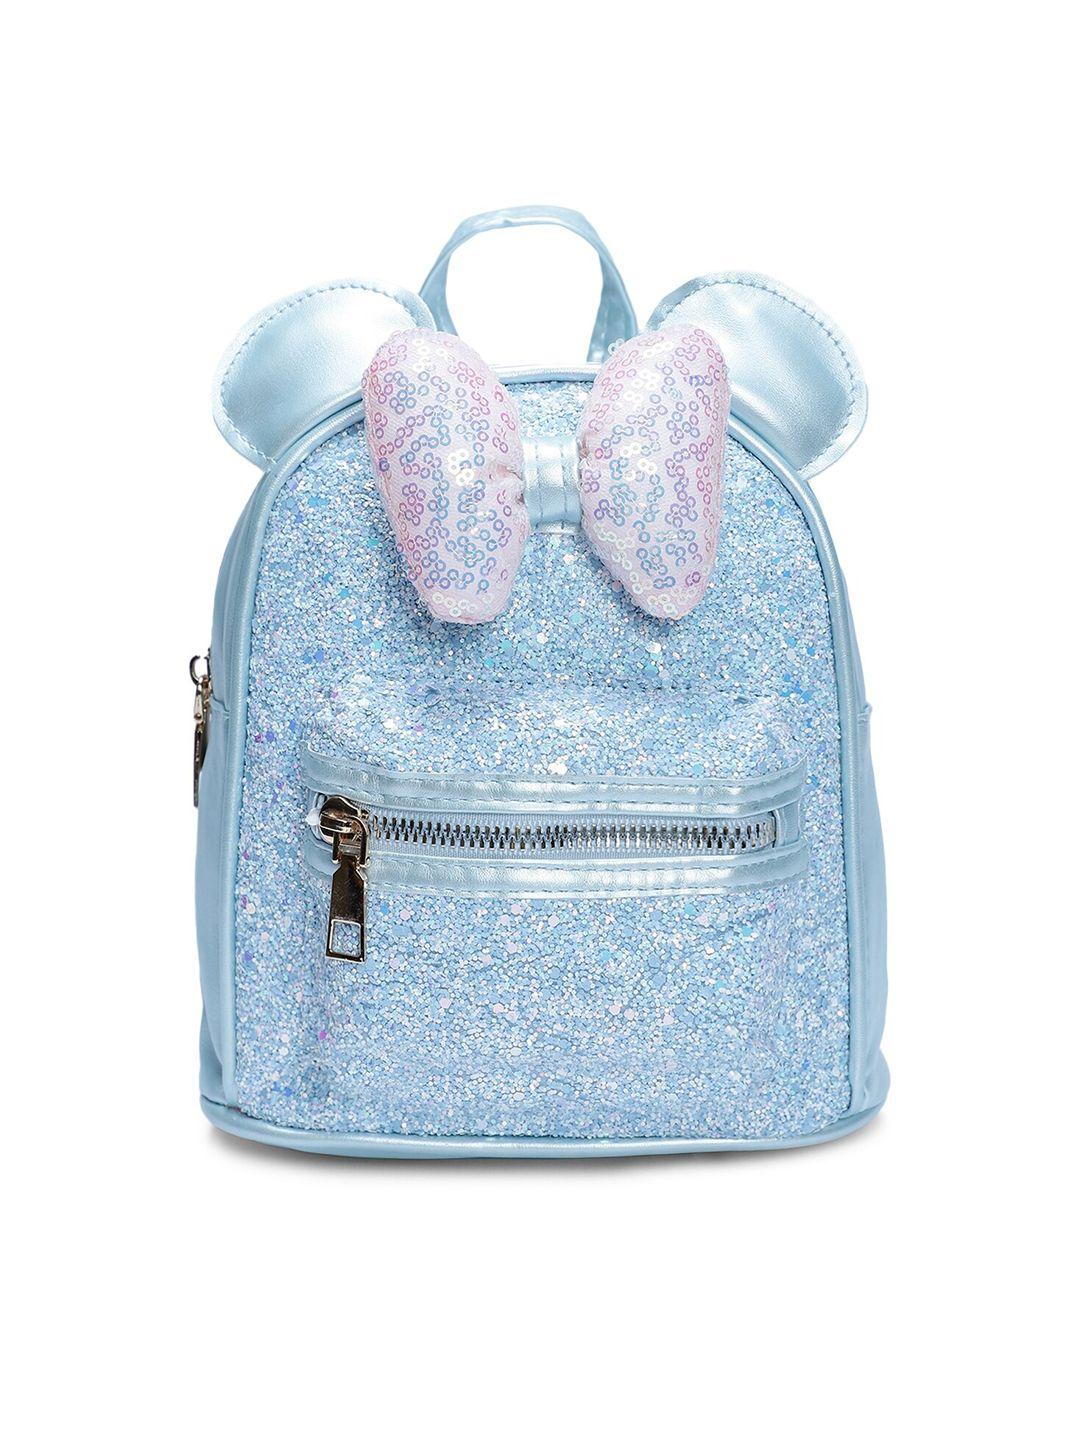 kids on board girls sequined embellished bow detail non-padded small backpack